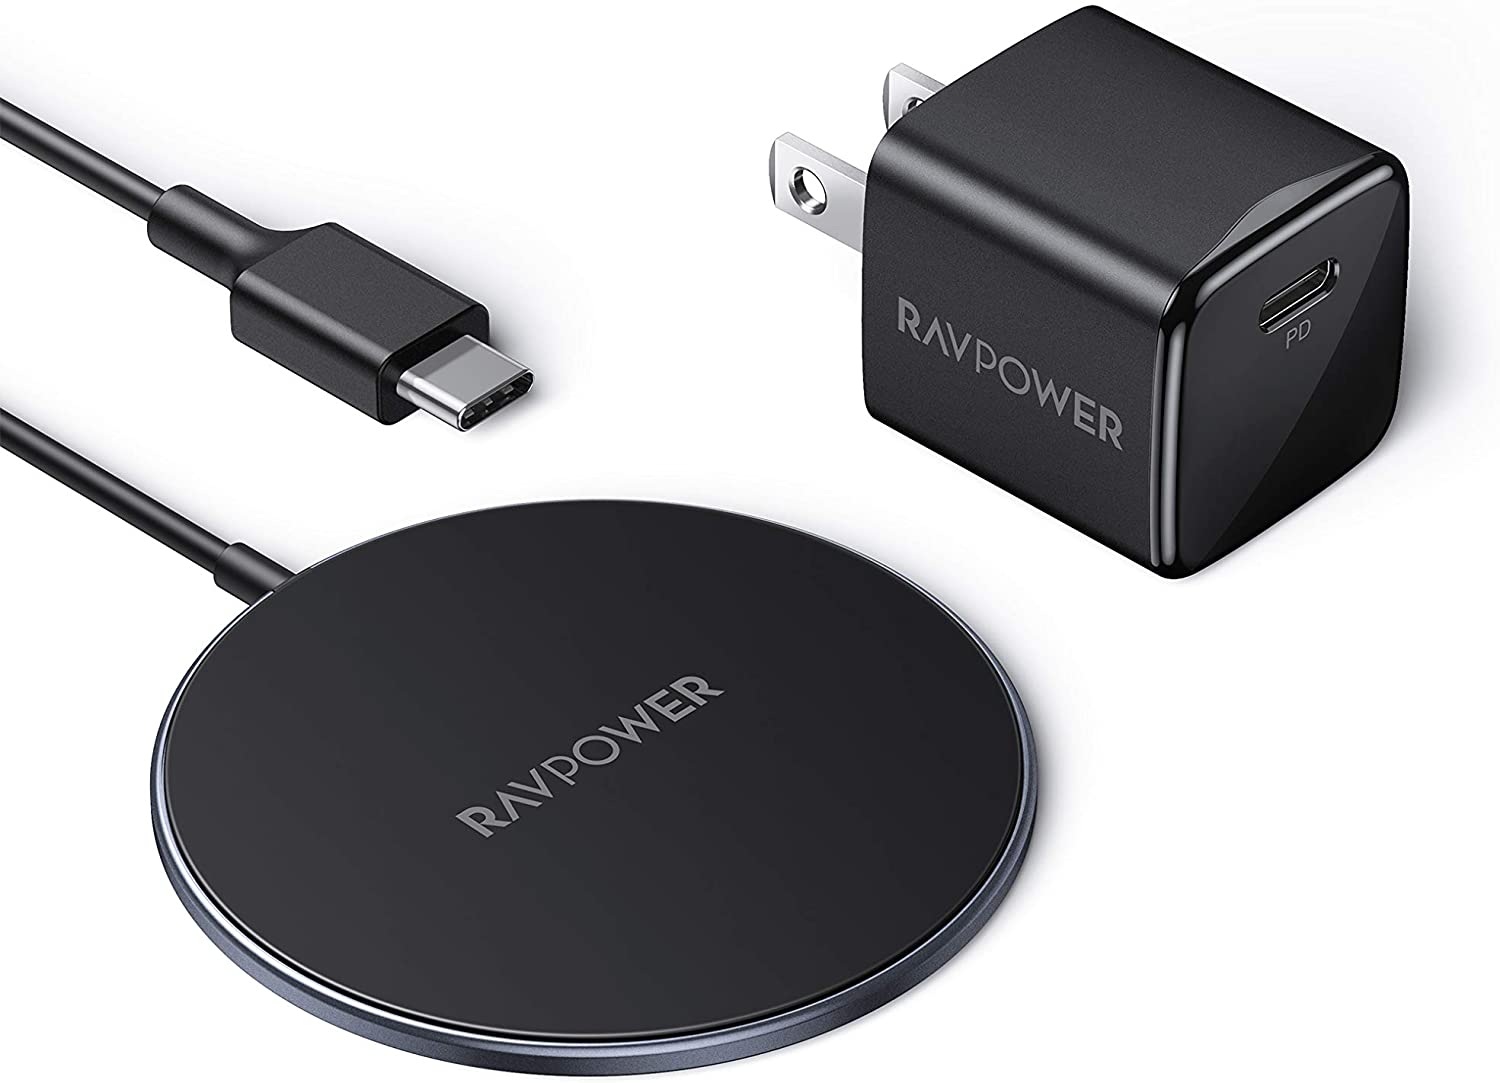 RAVpower magnetic charger